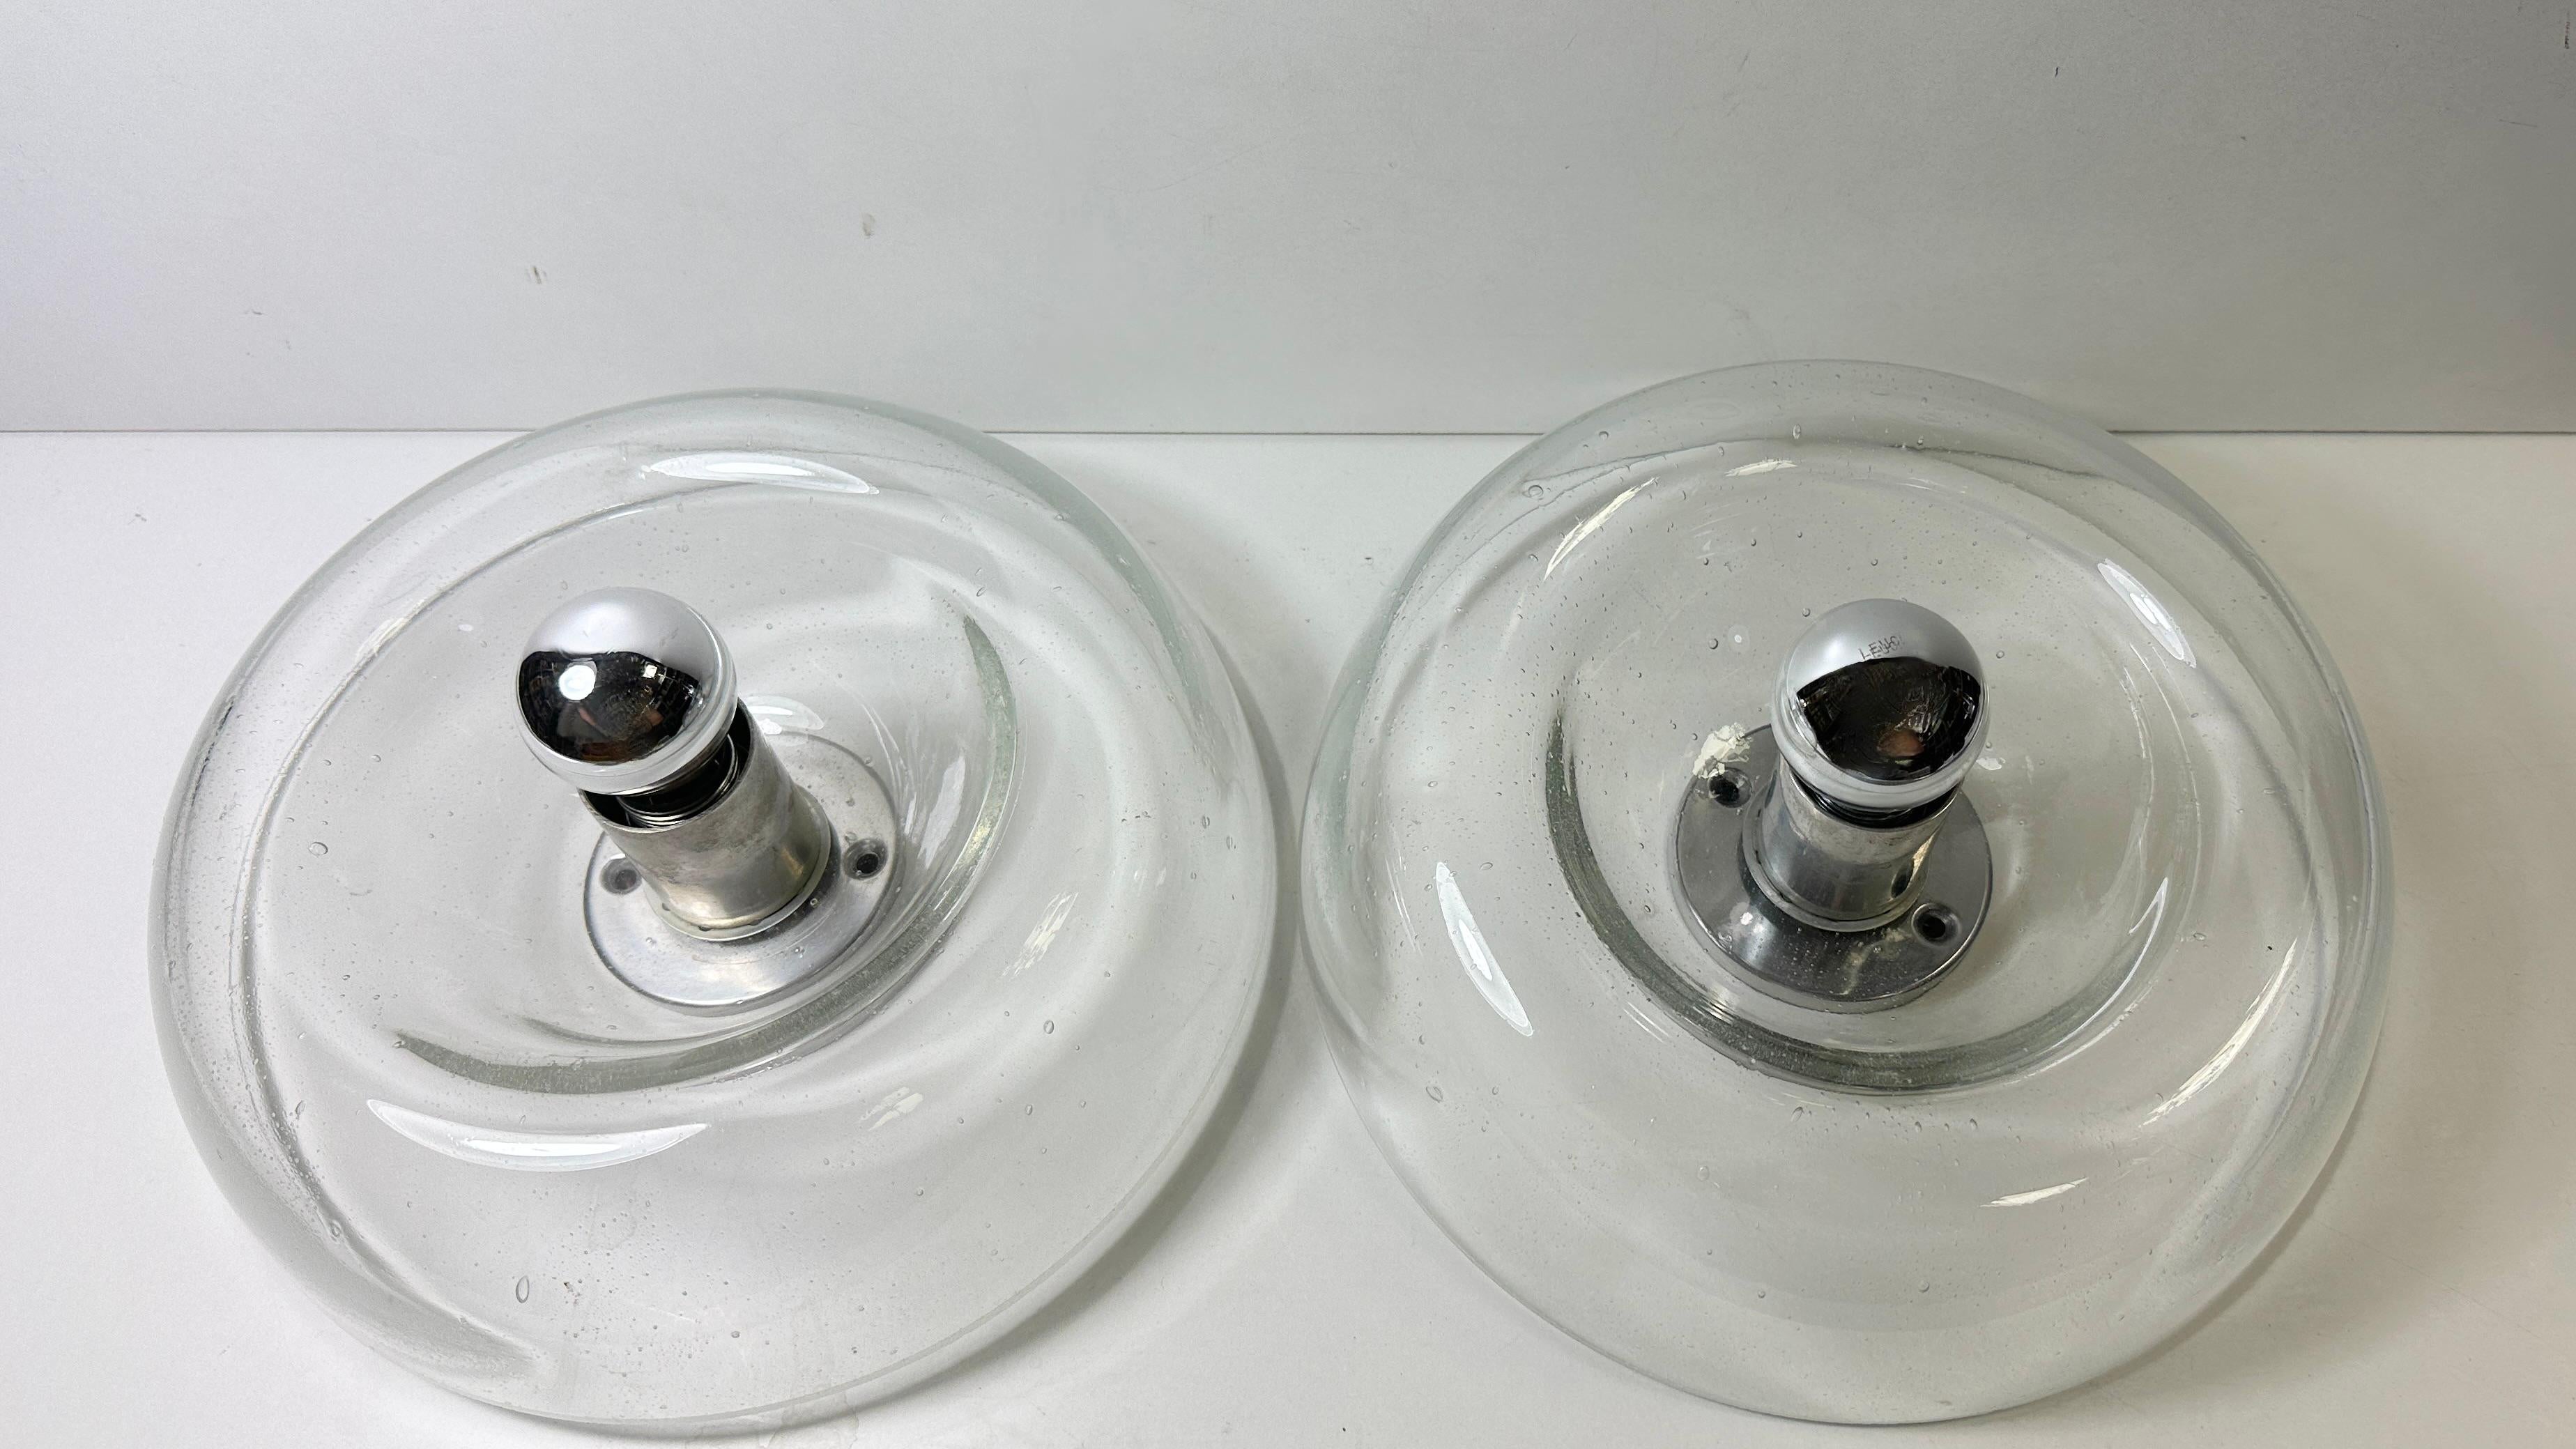 A stunning pair of donut shape glass wall sconces with small air bubble in the glass. Each consisting of a stylish Mid-Century Modern style design. Each fixture requires an European E14 / 110 Volt candelabra bulb, up to 40 watts. Found at an estate